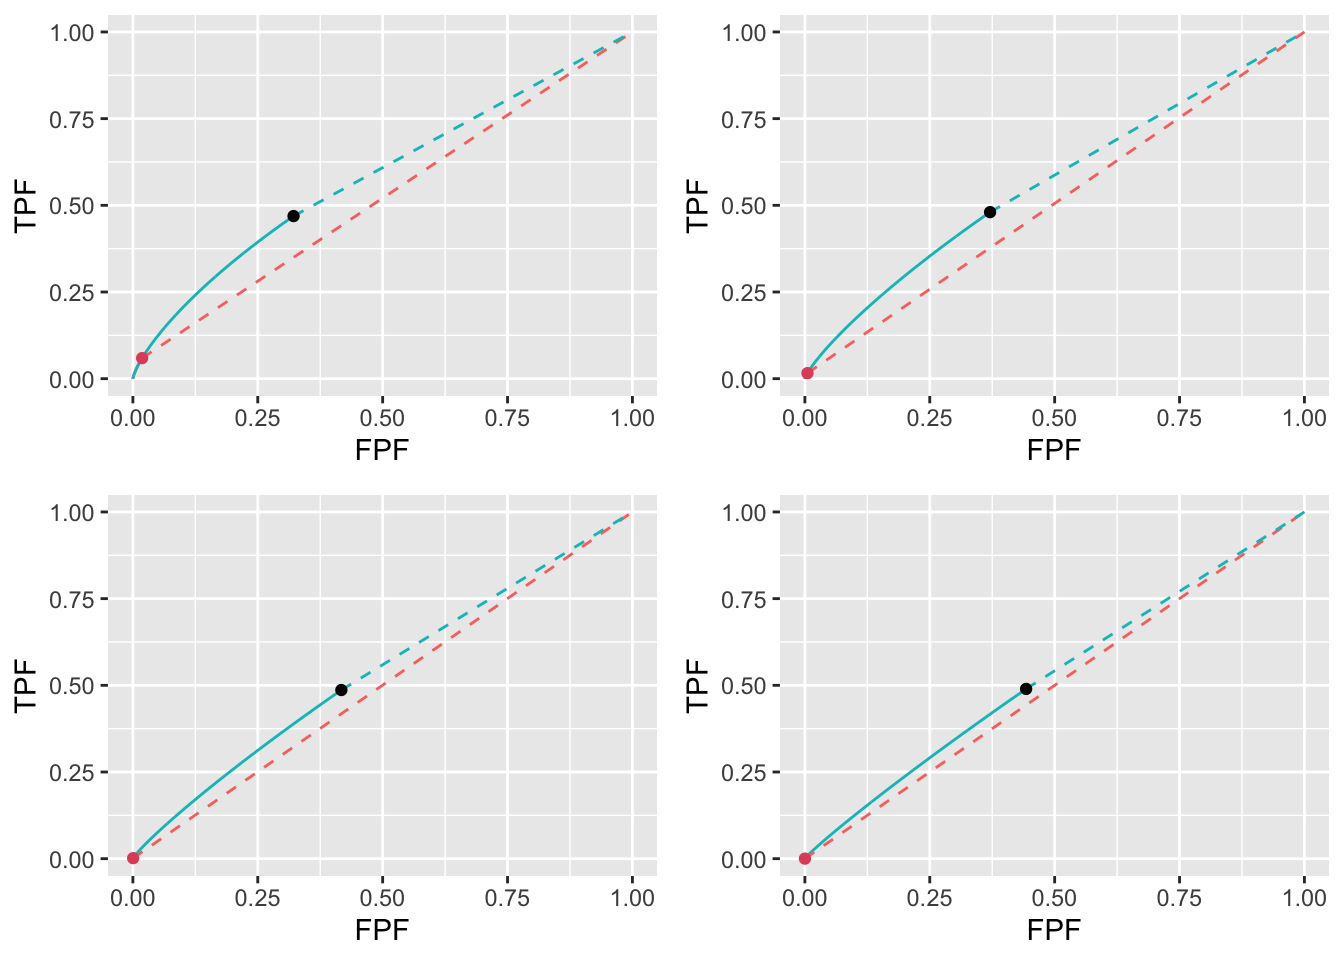 Low performance varying $\lambda$ ROC plots for the two optimization methods with superimposed operating points. The color coding is as in previous figures. The values of $\lambda$ are: top-left $\lambda = 1$, top-right $\lambda = 2$, bottom-left $\lambda = 5$ and bottom-right $\lambda = 10$.